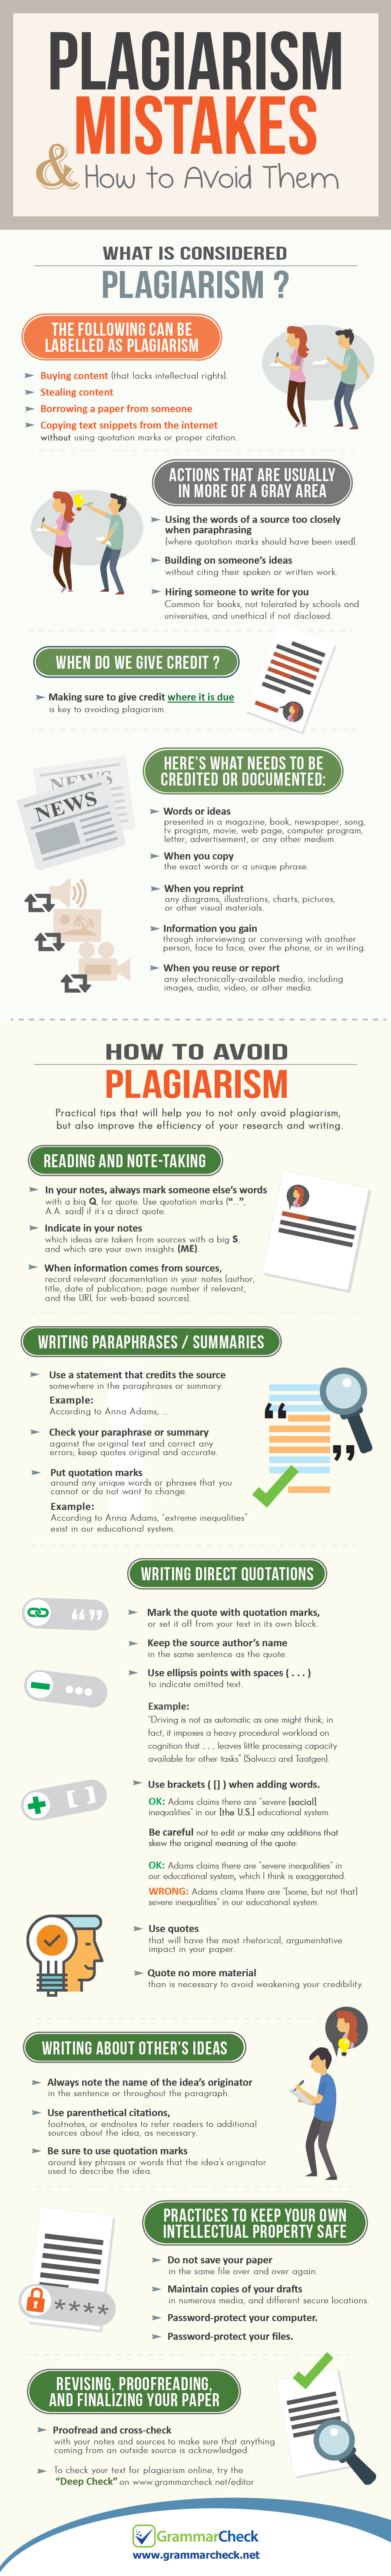 Understanding Plagiarism and How to Avoid Mistakes - Infographic